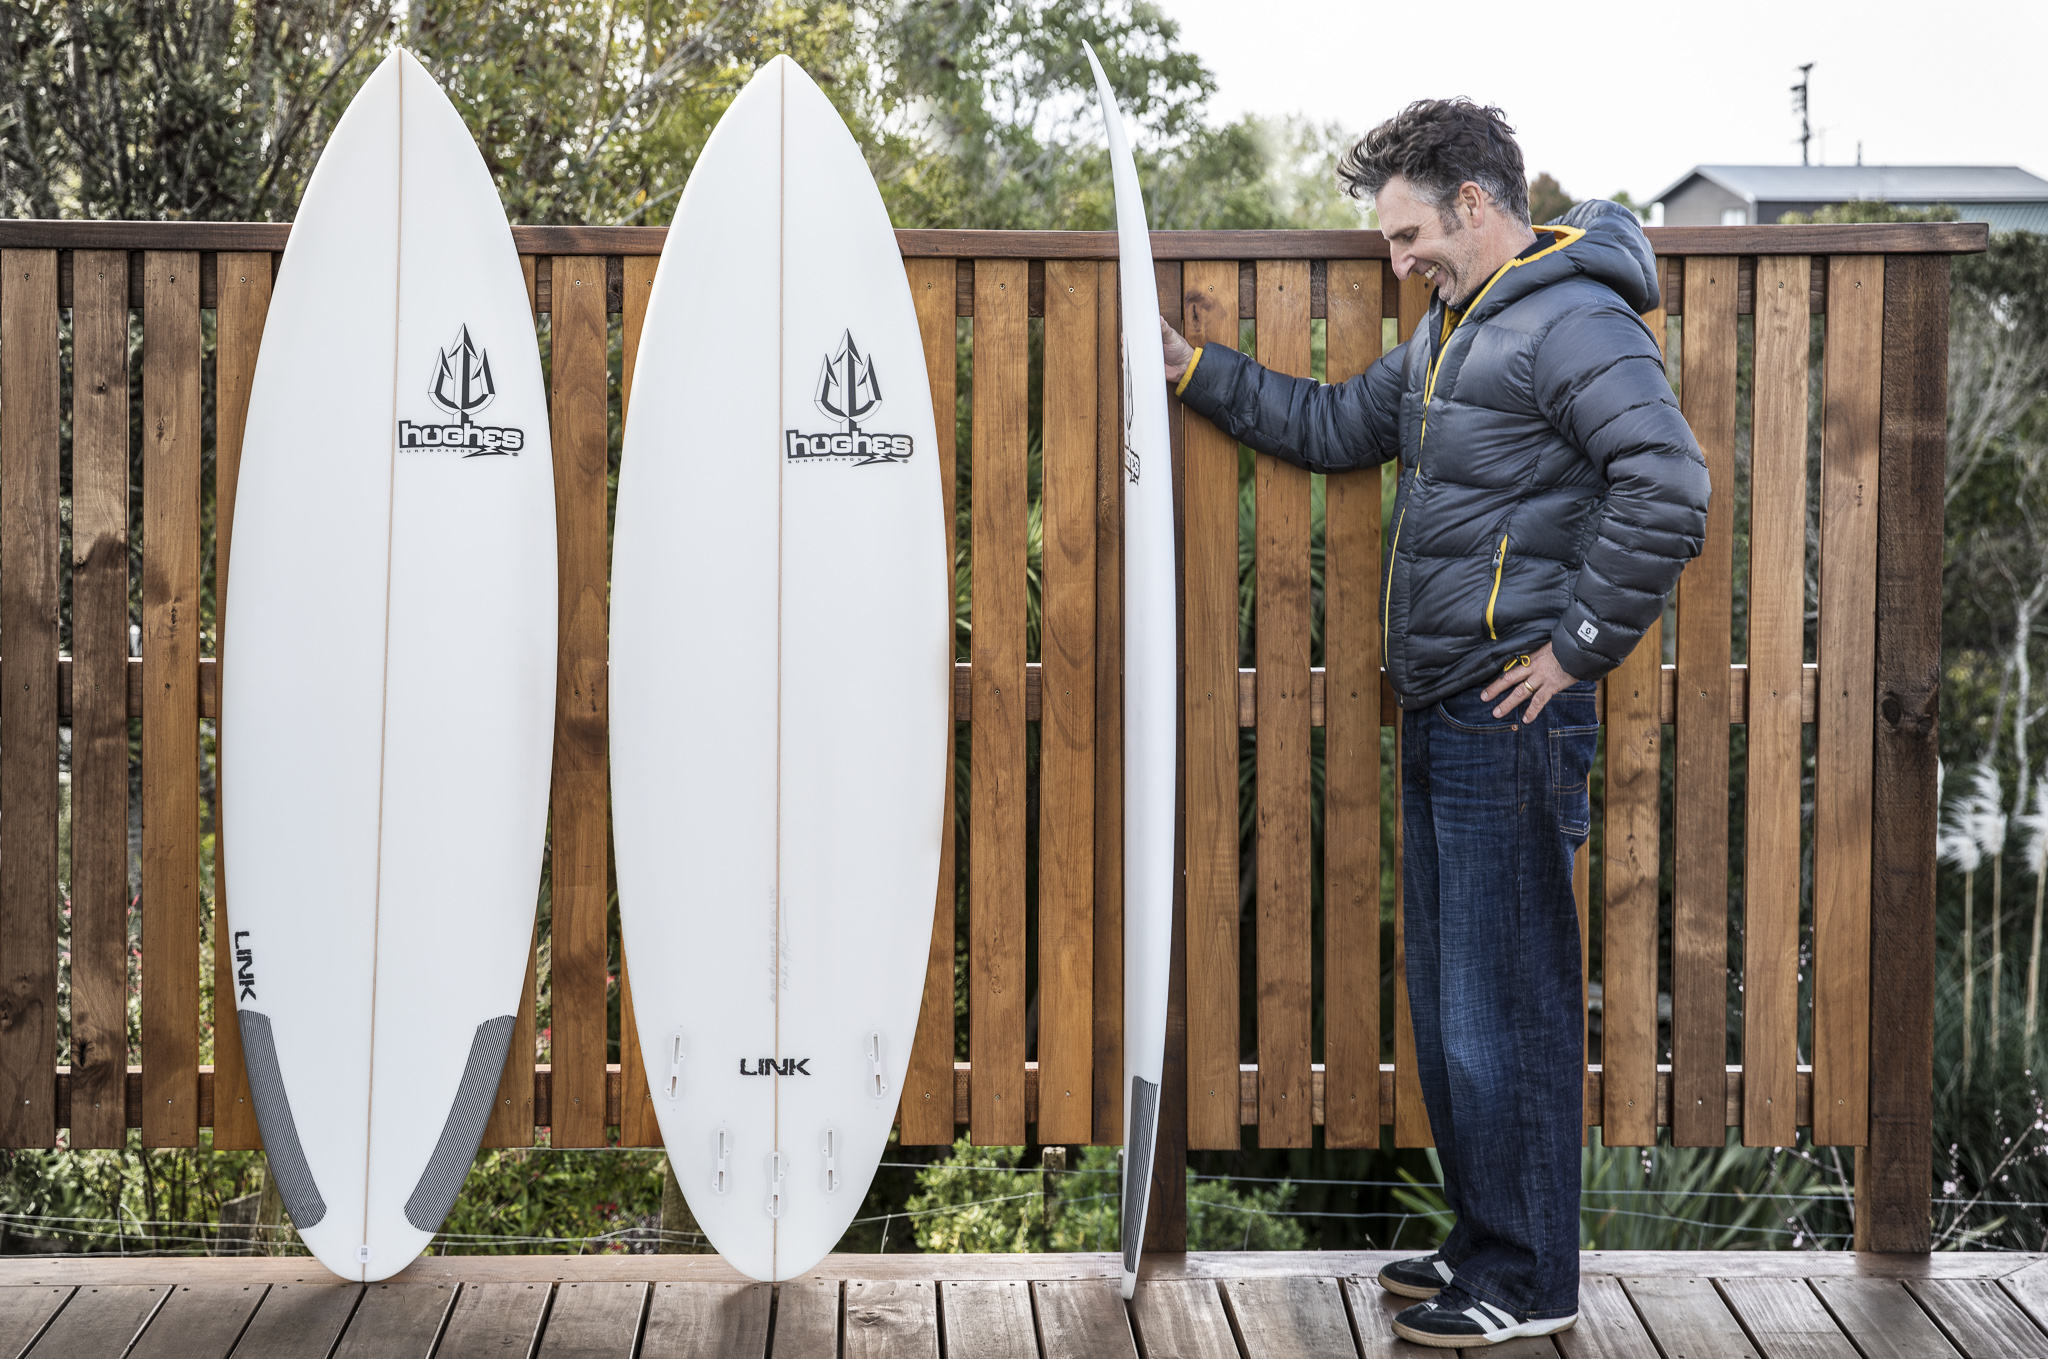 School Madam Xxx Fast Speed Fuke Me Xxx - Board Review: Have We Found The Missing Link? - New Zealand Surf Journal